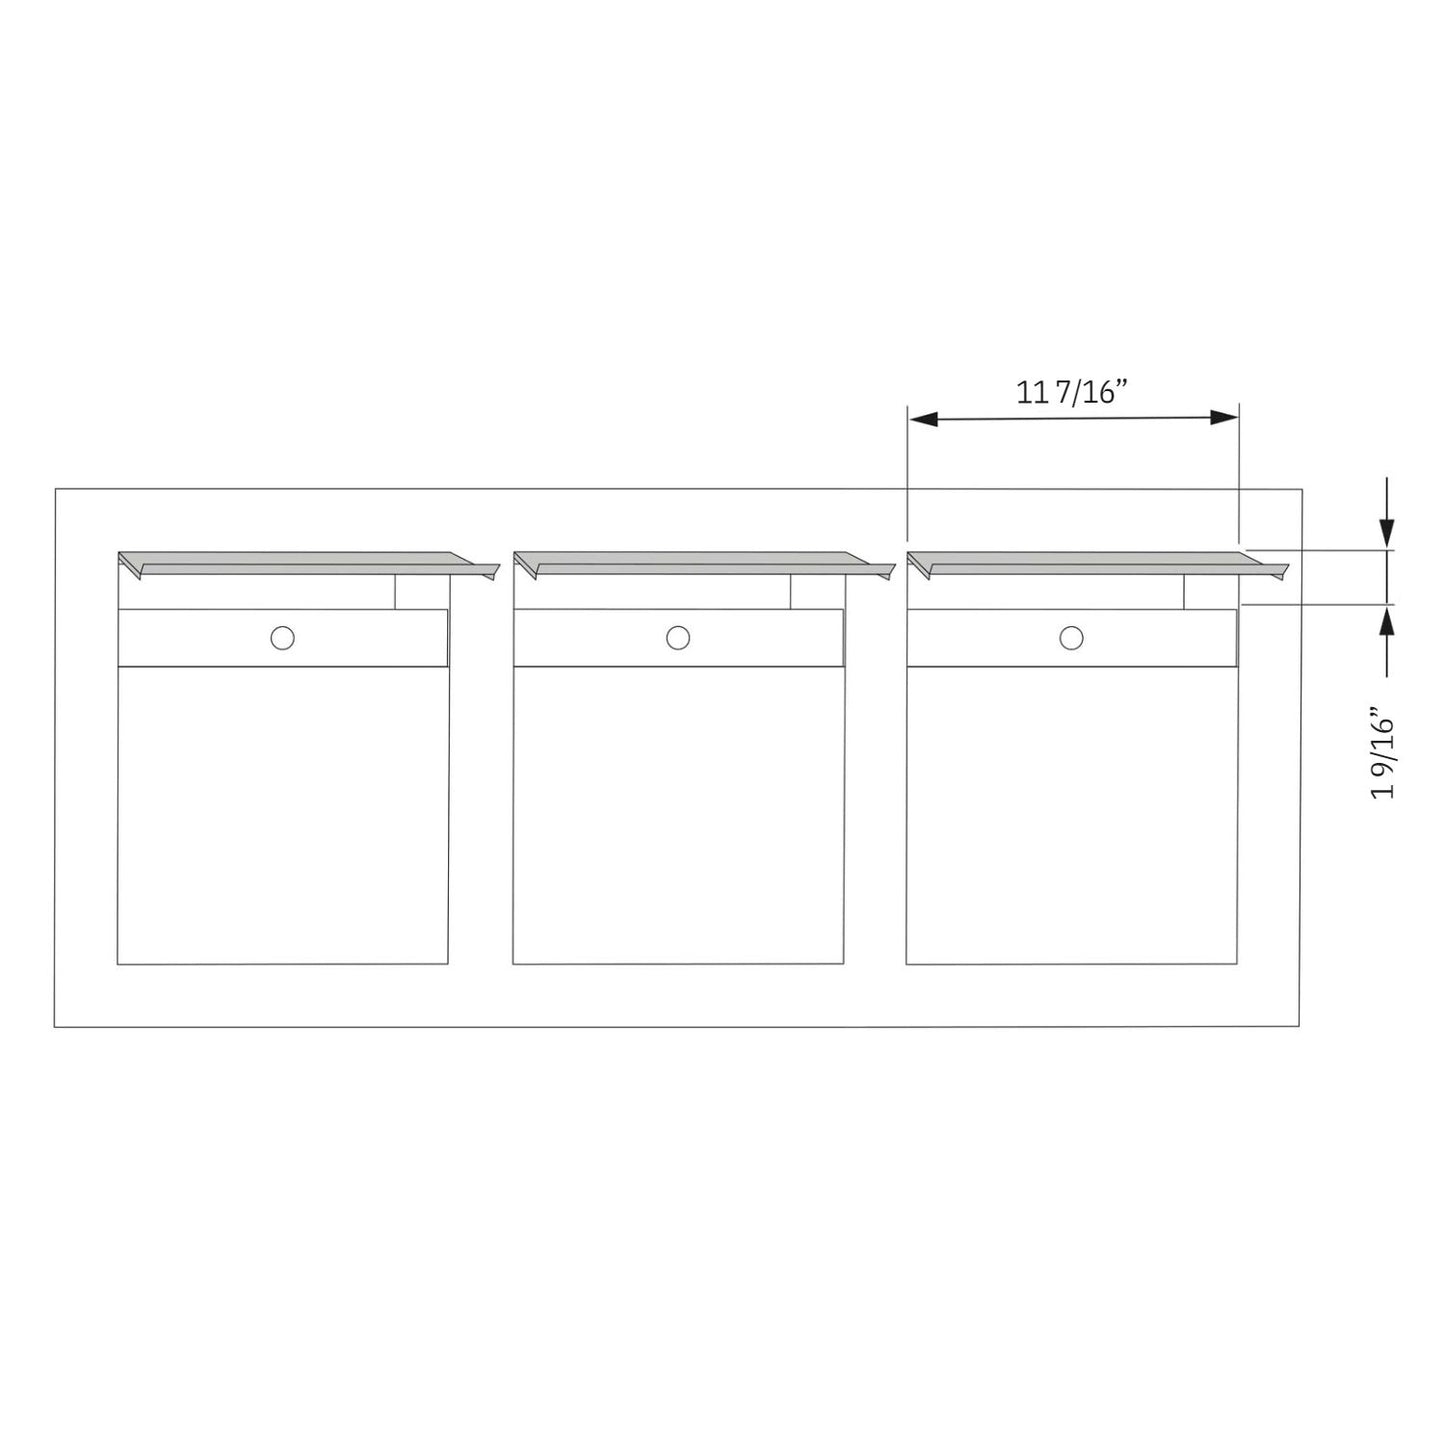 PROFILE 3 Built-in - Embedded or column multi-unit locking mailbox in black